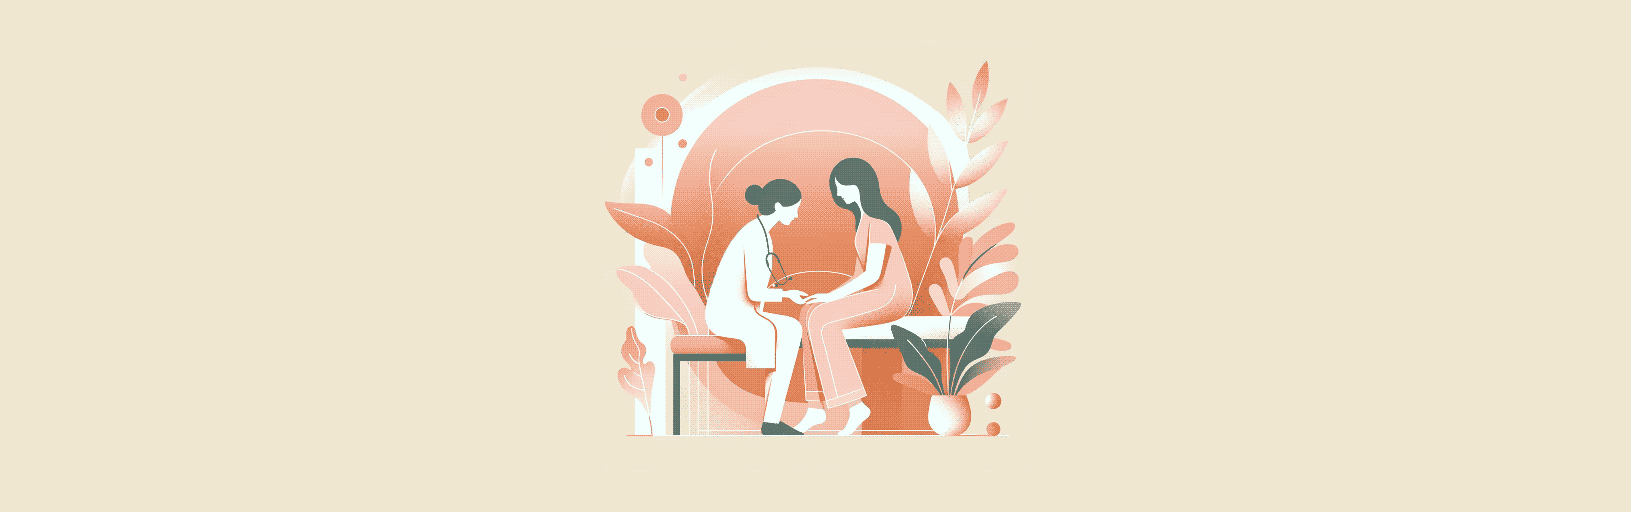 Illustration of a healthcare professional sitting beside a woman, offering support. The scene features a warm, calming background with floral elements, representing compassionate care at the London Pregnancy Clinic.